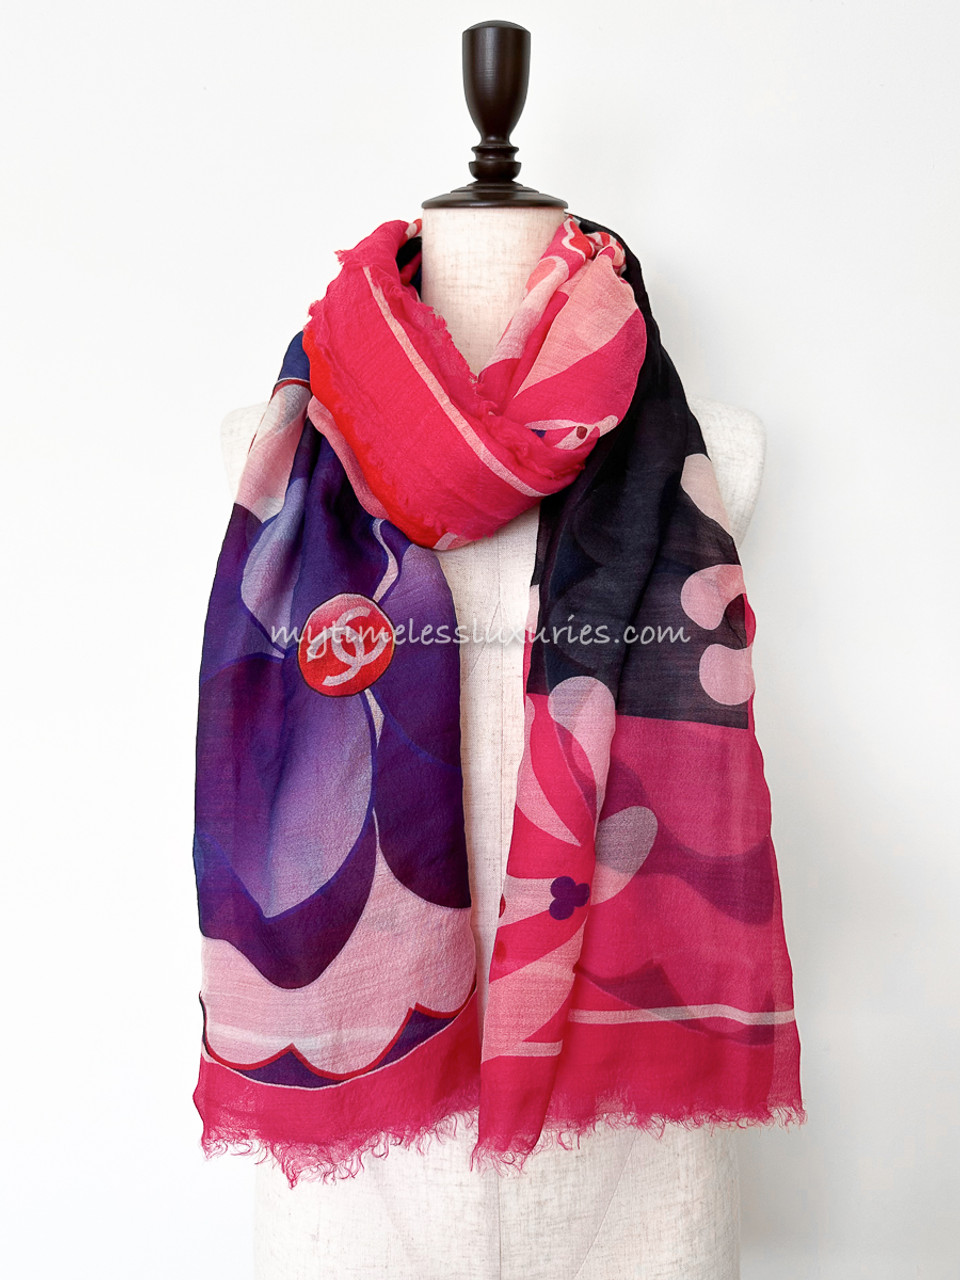 Buy Tossido Printed Designer Scarf & Bag Scarf Gift Box (Scarf22) at  Amazon.in